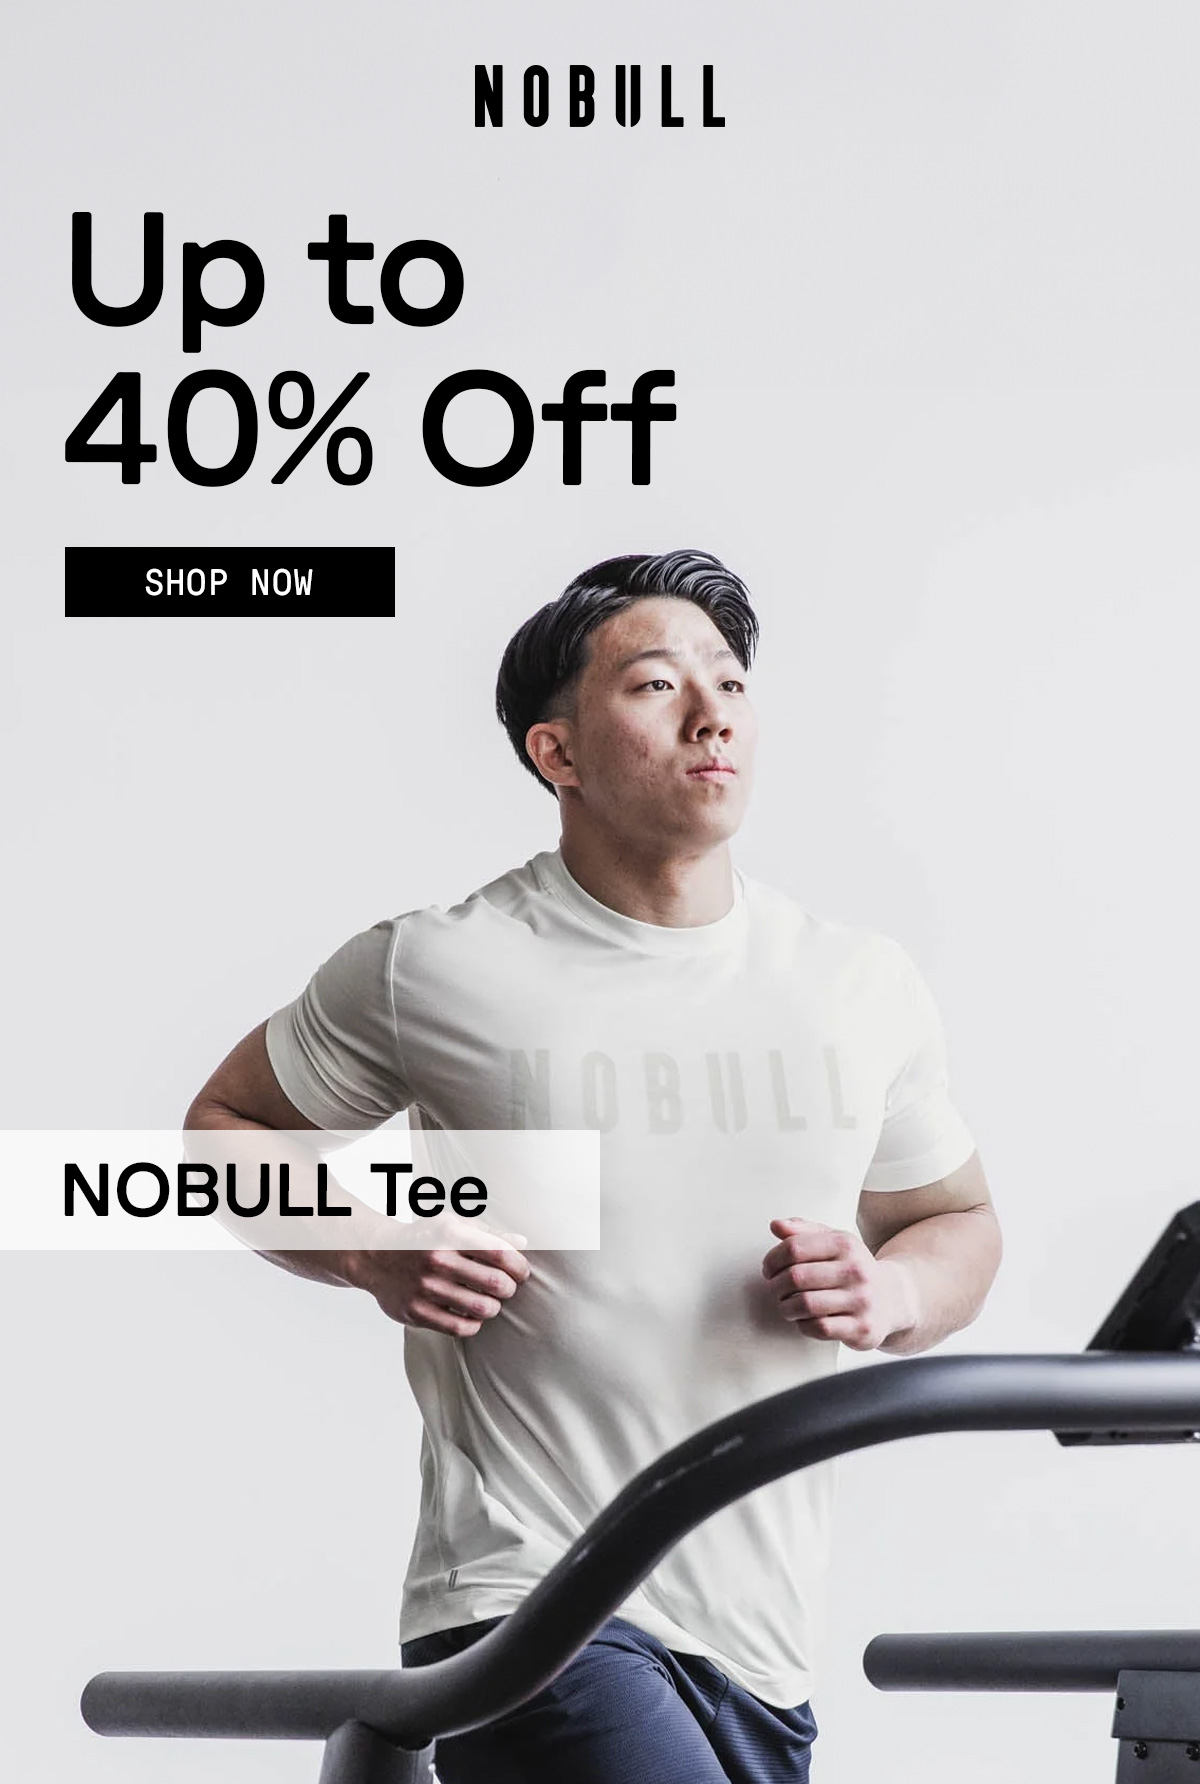 UP TO 40% OFF SALE SECTION